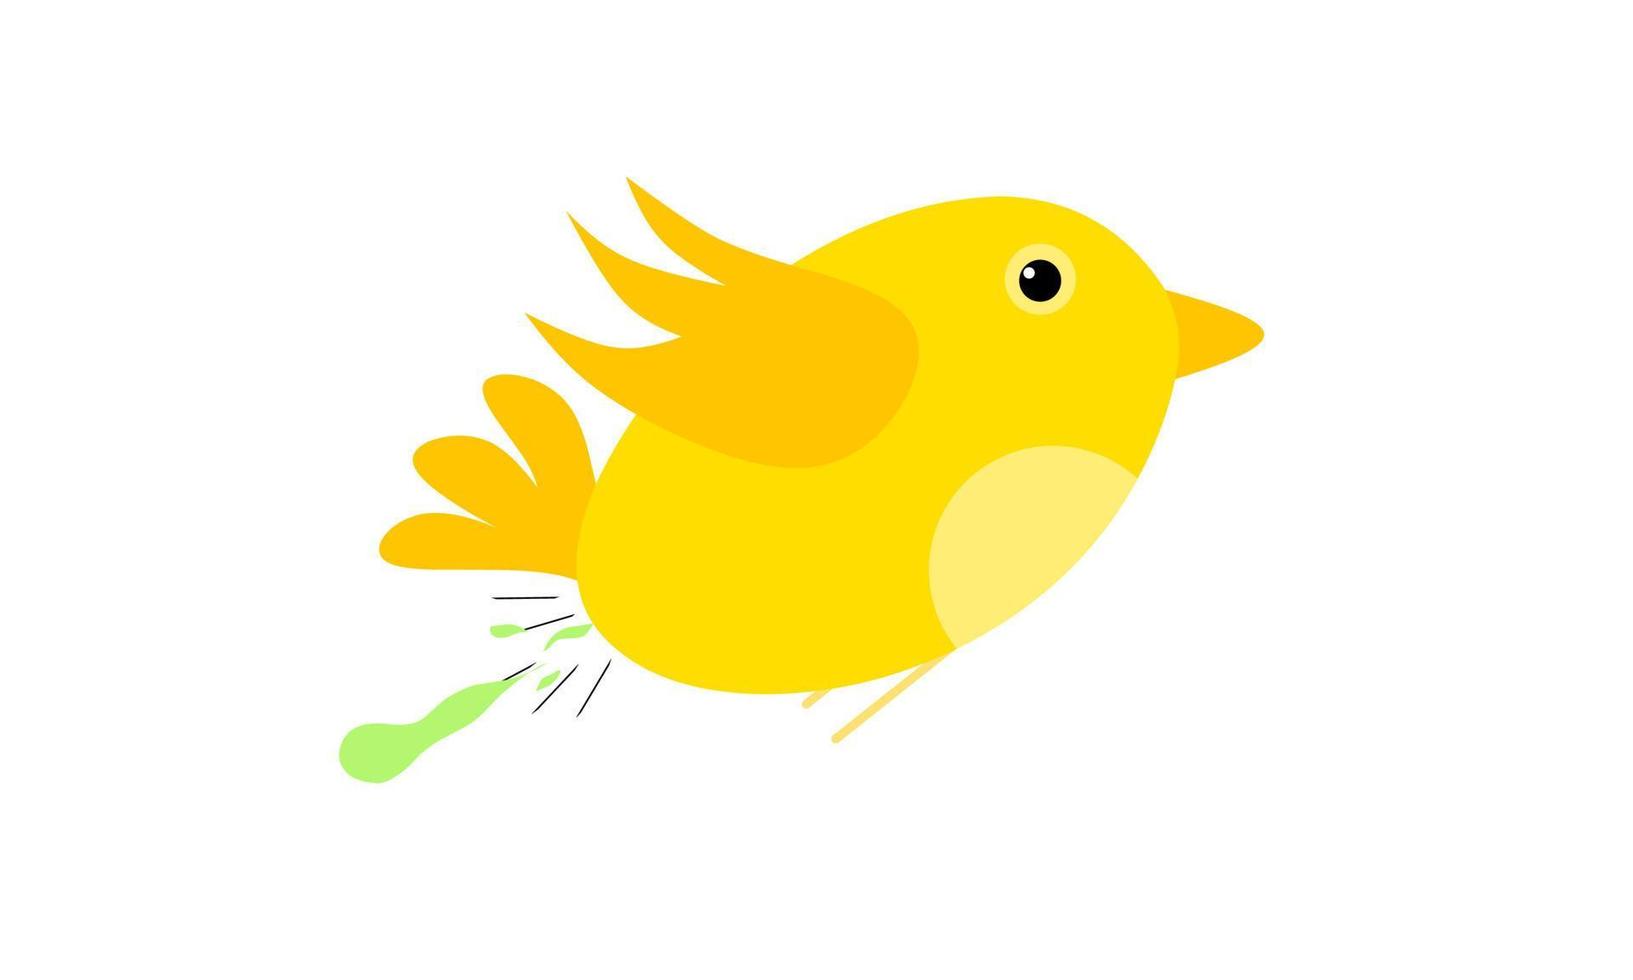 Vector of bird droppings in flight. Cute bird design, in yellow color. Great for bird hygiene logo on white background.